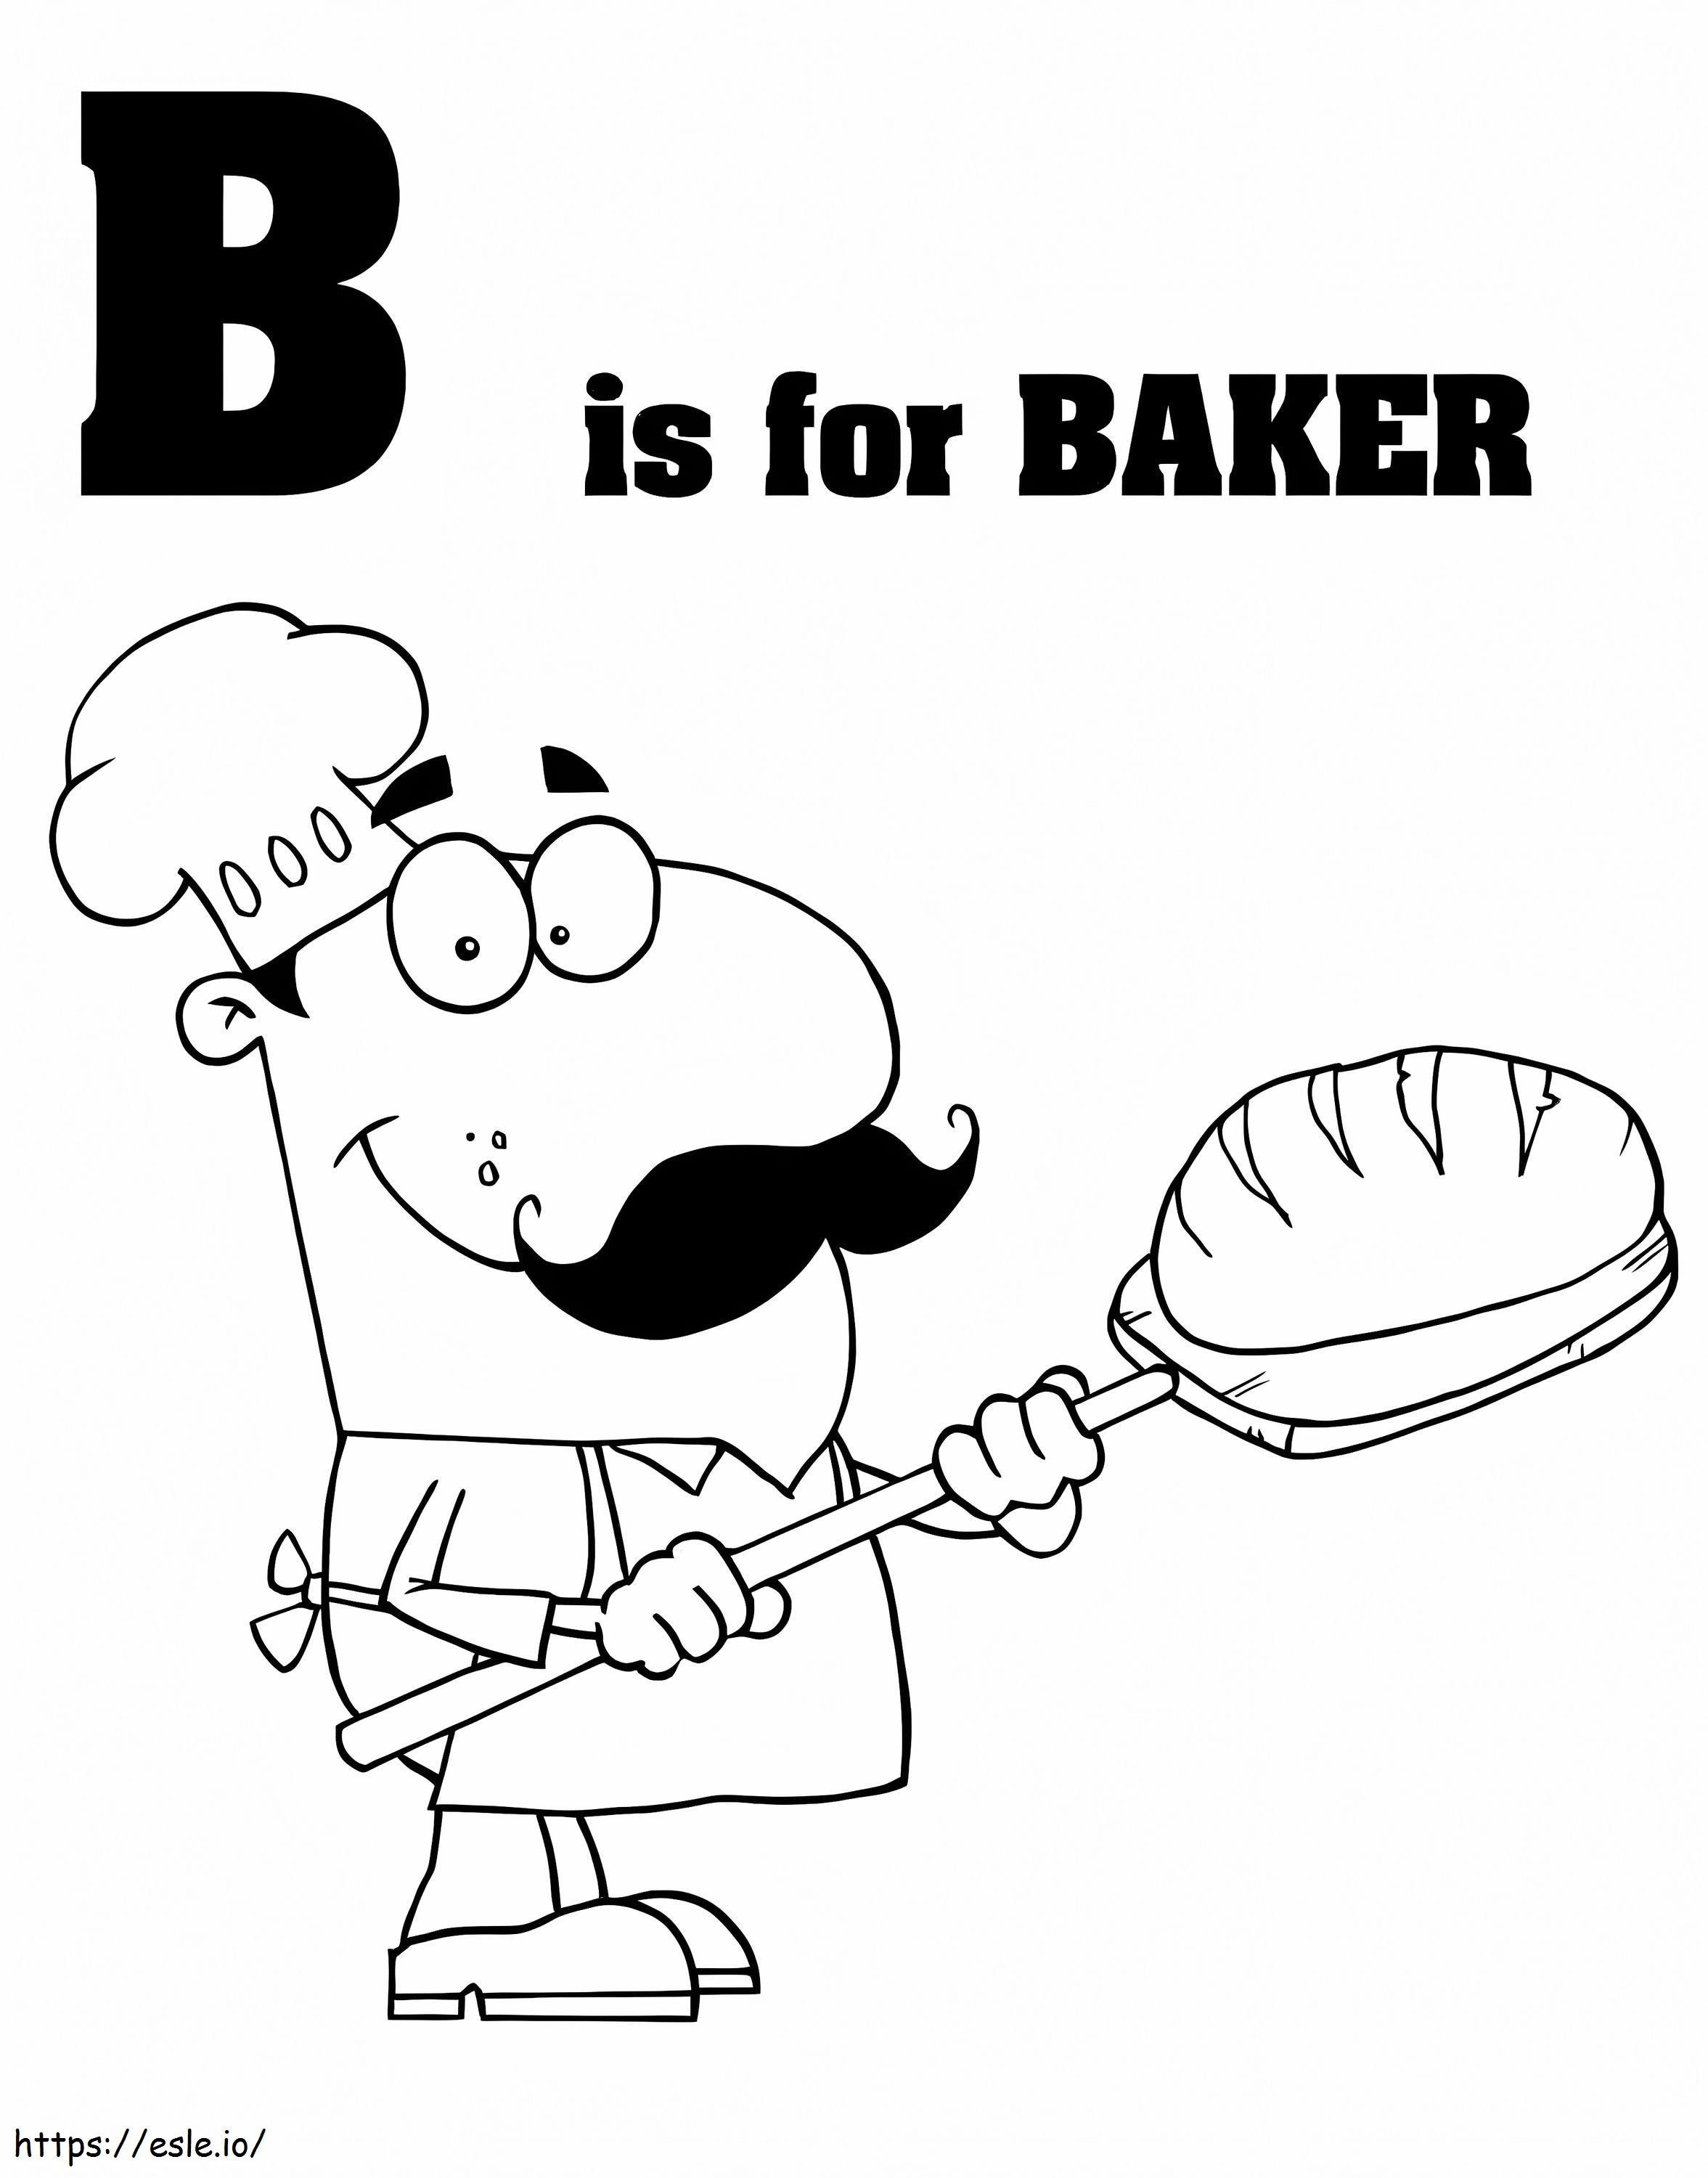 Baker Letter B coloring page